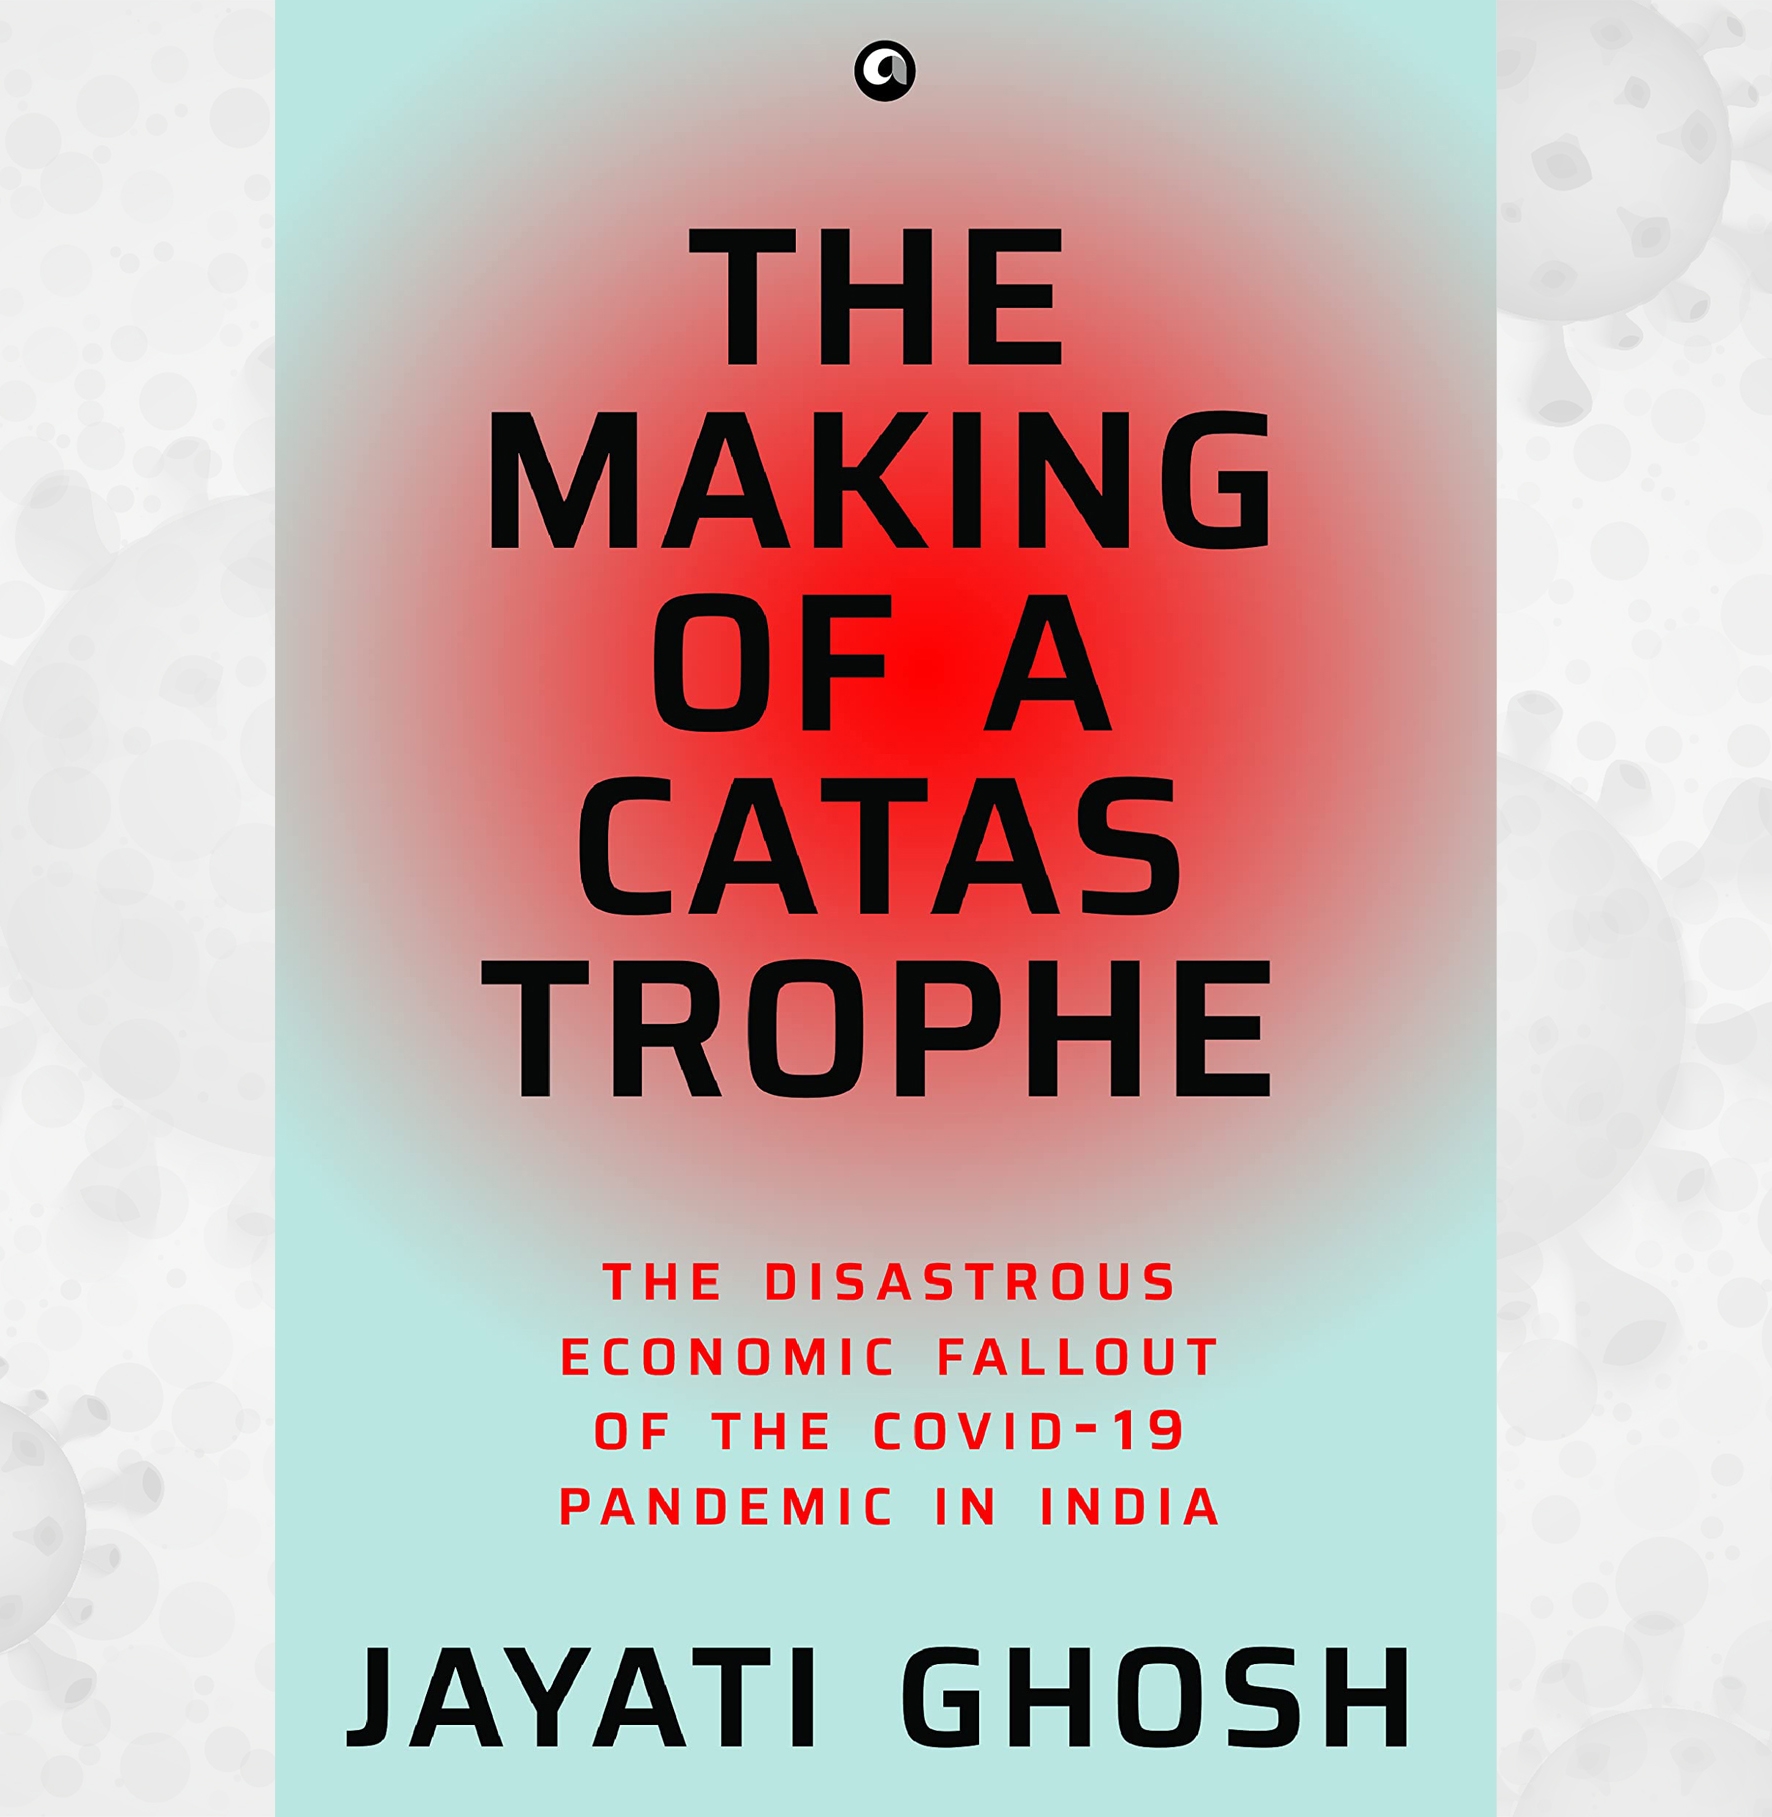 The Making of a Catastrophe: The Disastrous Economic Fallout of the Covid-19 Pandemic in India